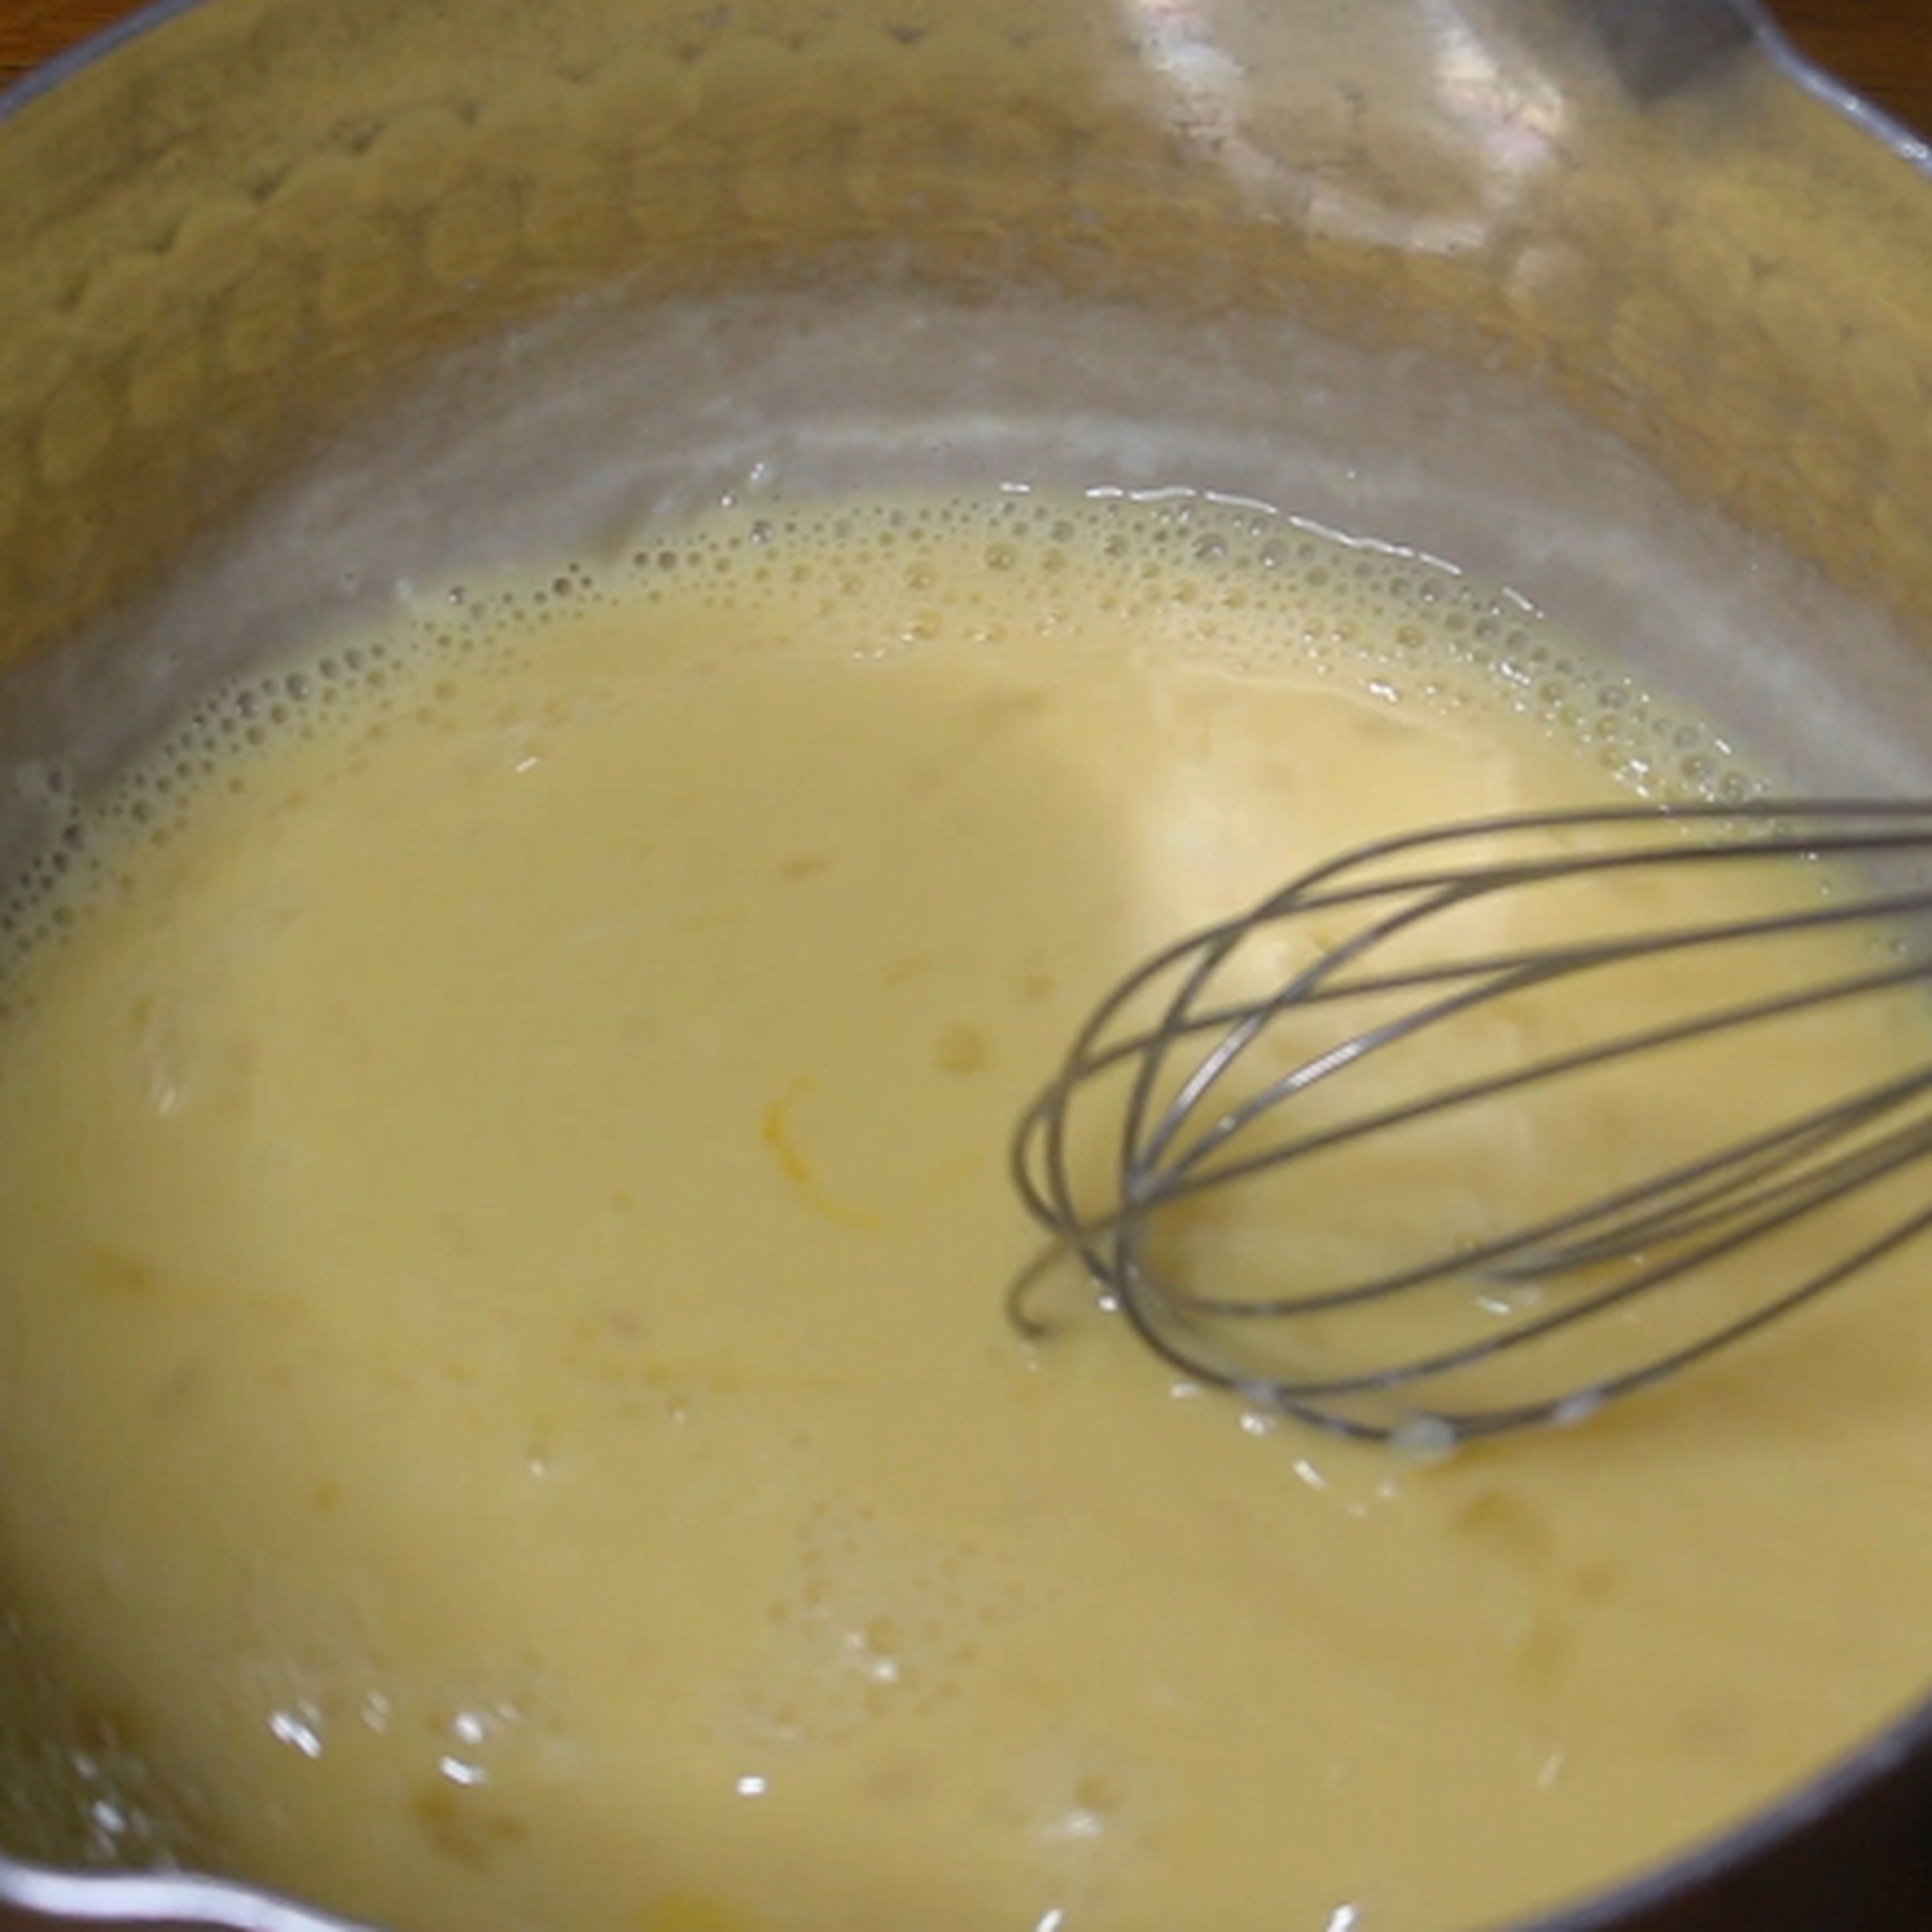 Combined the warm milk with brown sugar, salt in a large bowl and whisk it well until the sugar melted. And add the whole egg and whisk it well.